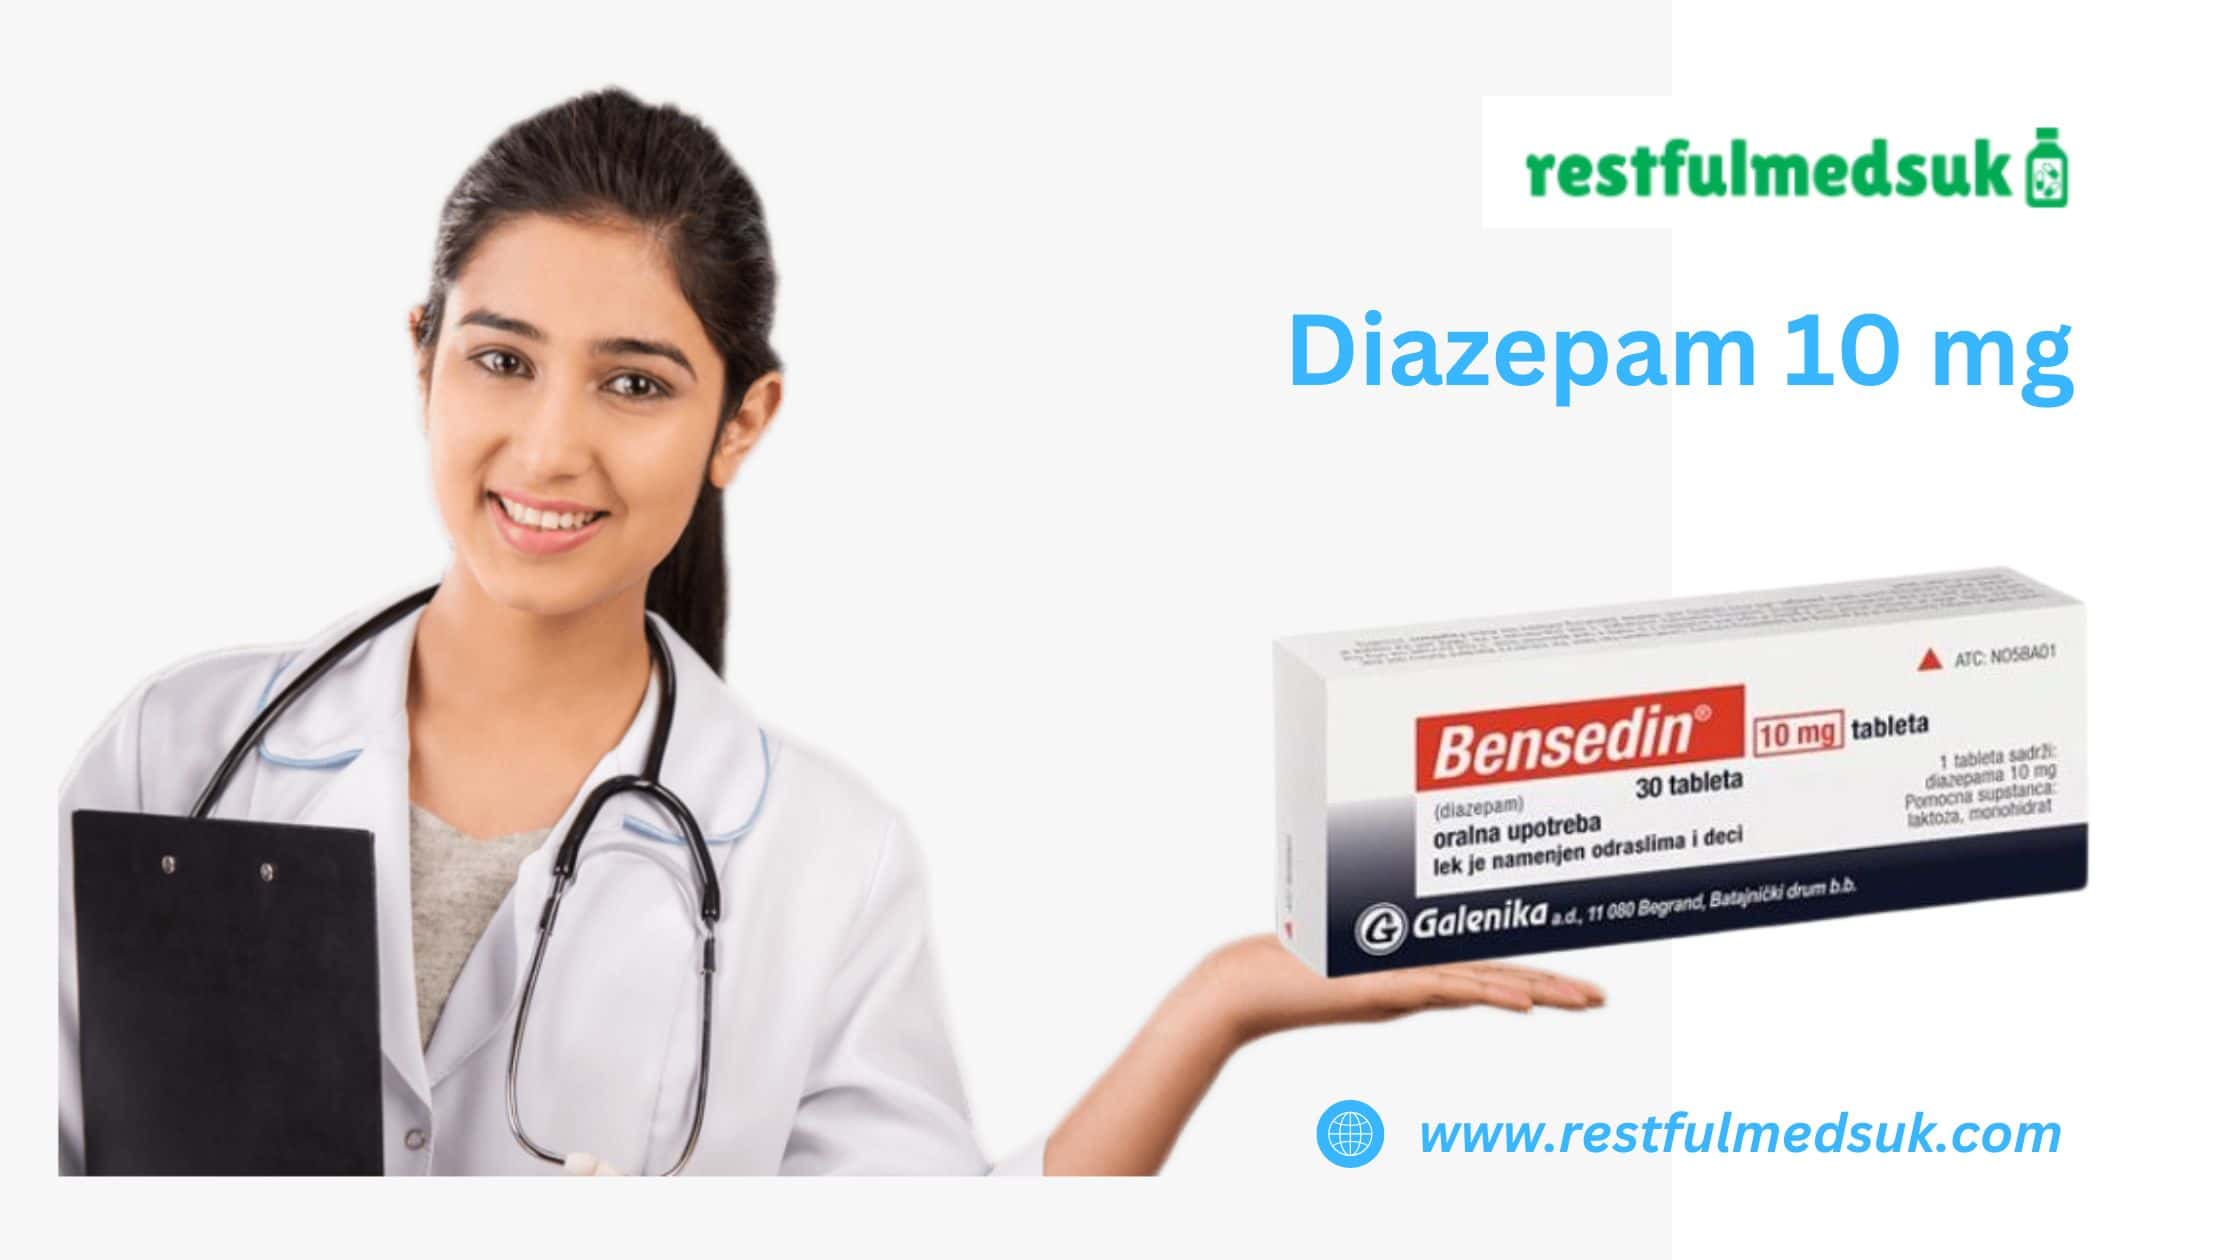 Buy Diazepam Without a Prescription Online Overnight